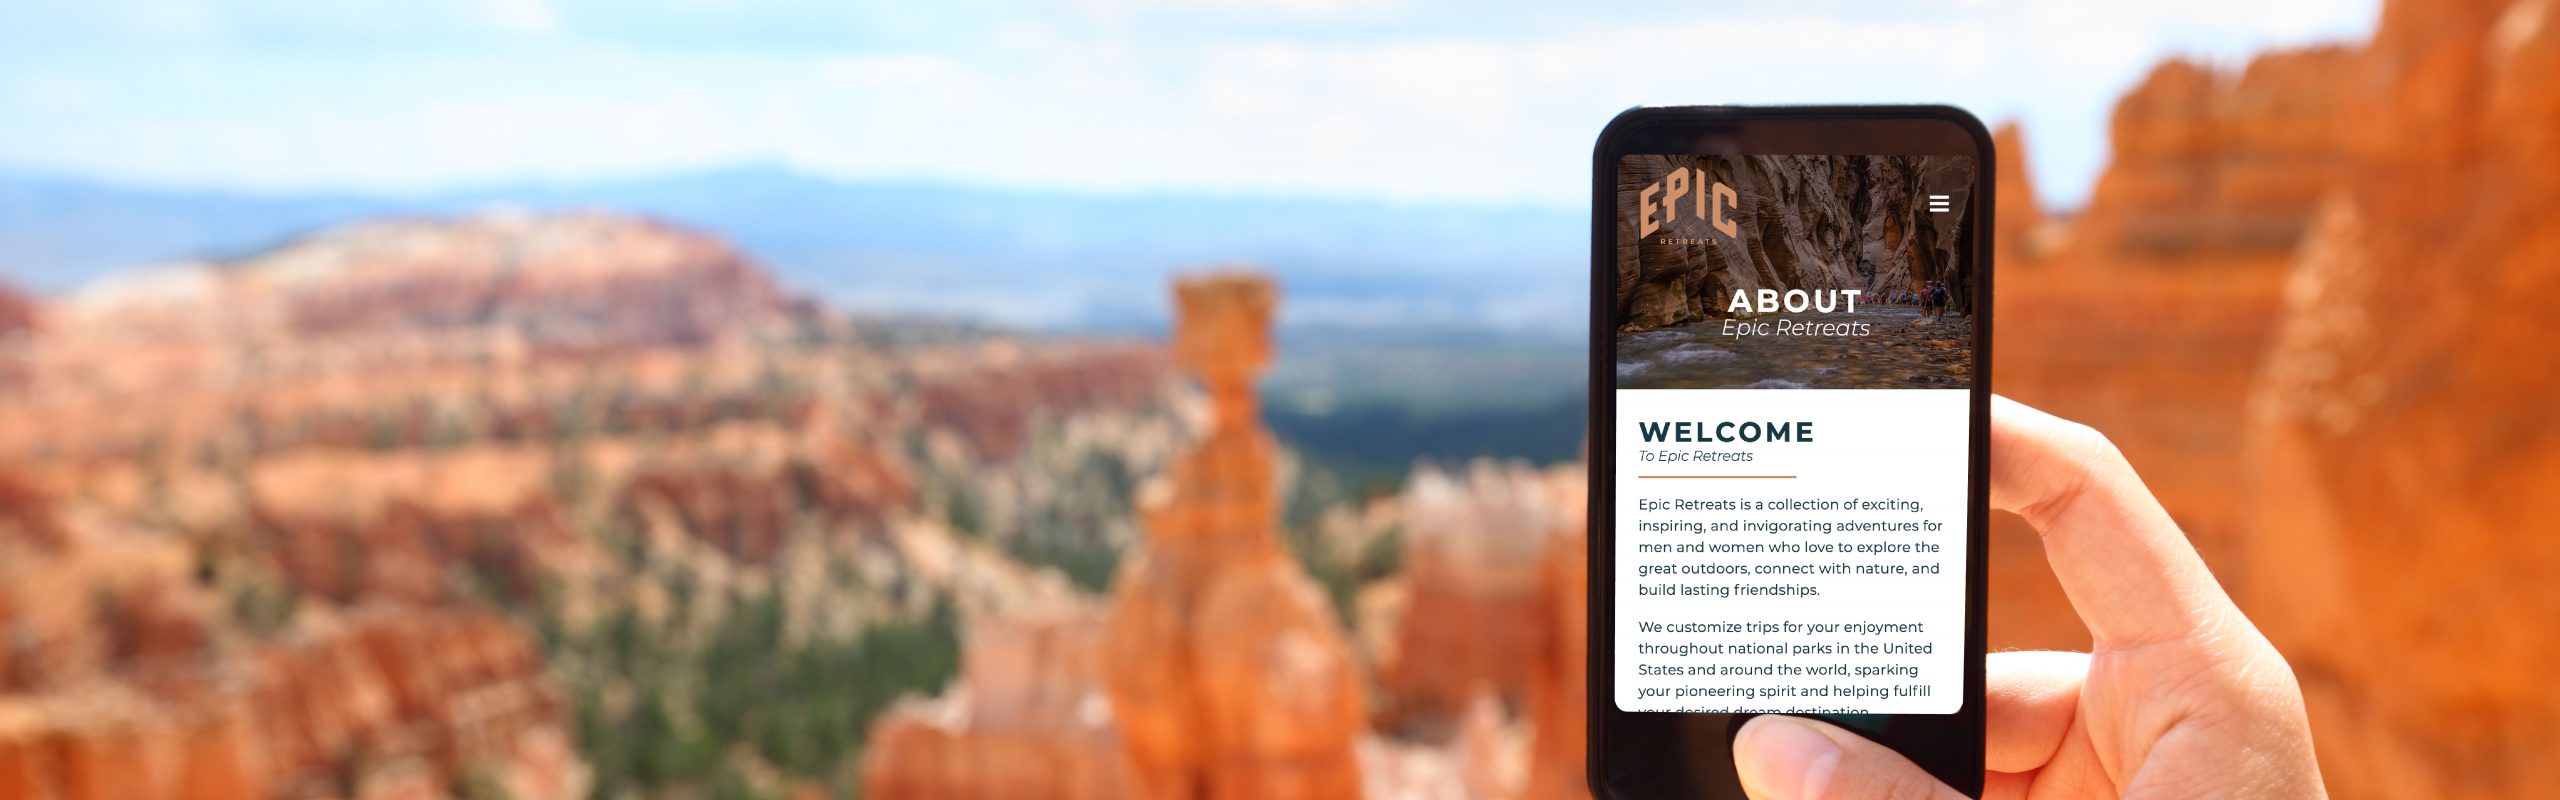 A person's hand holding a smartphone with an "Epic Retreats" page open, against the backdrop of a scenic red rock canyon.